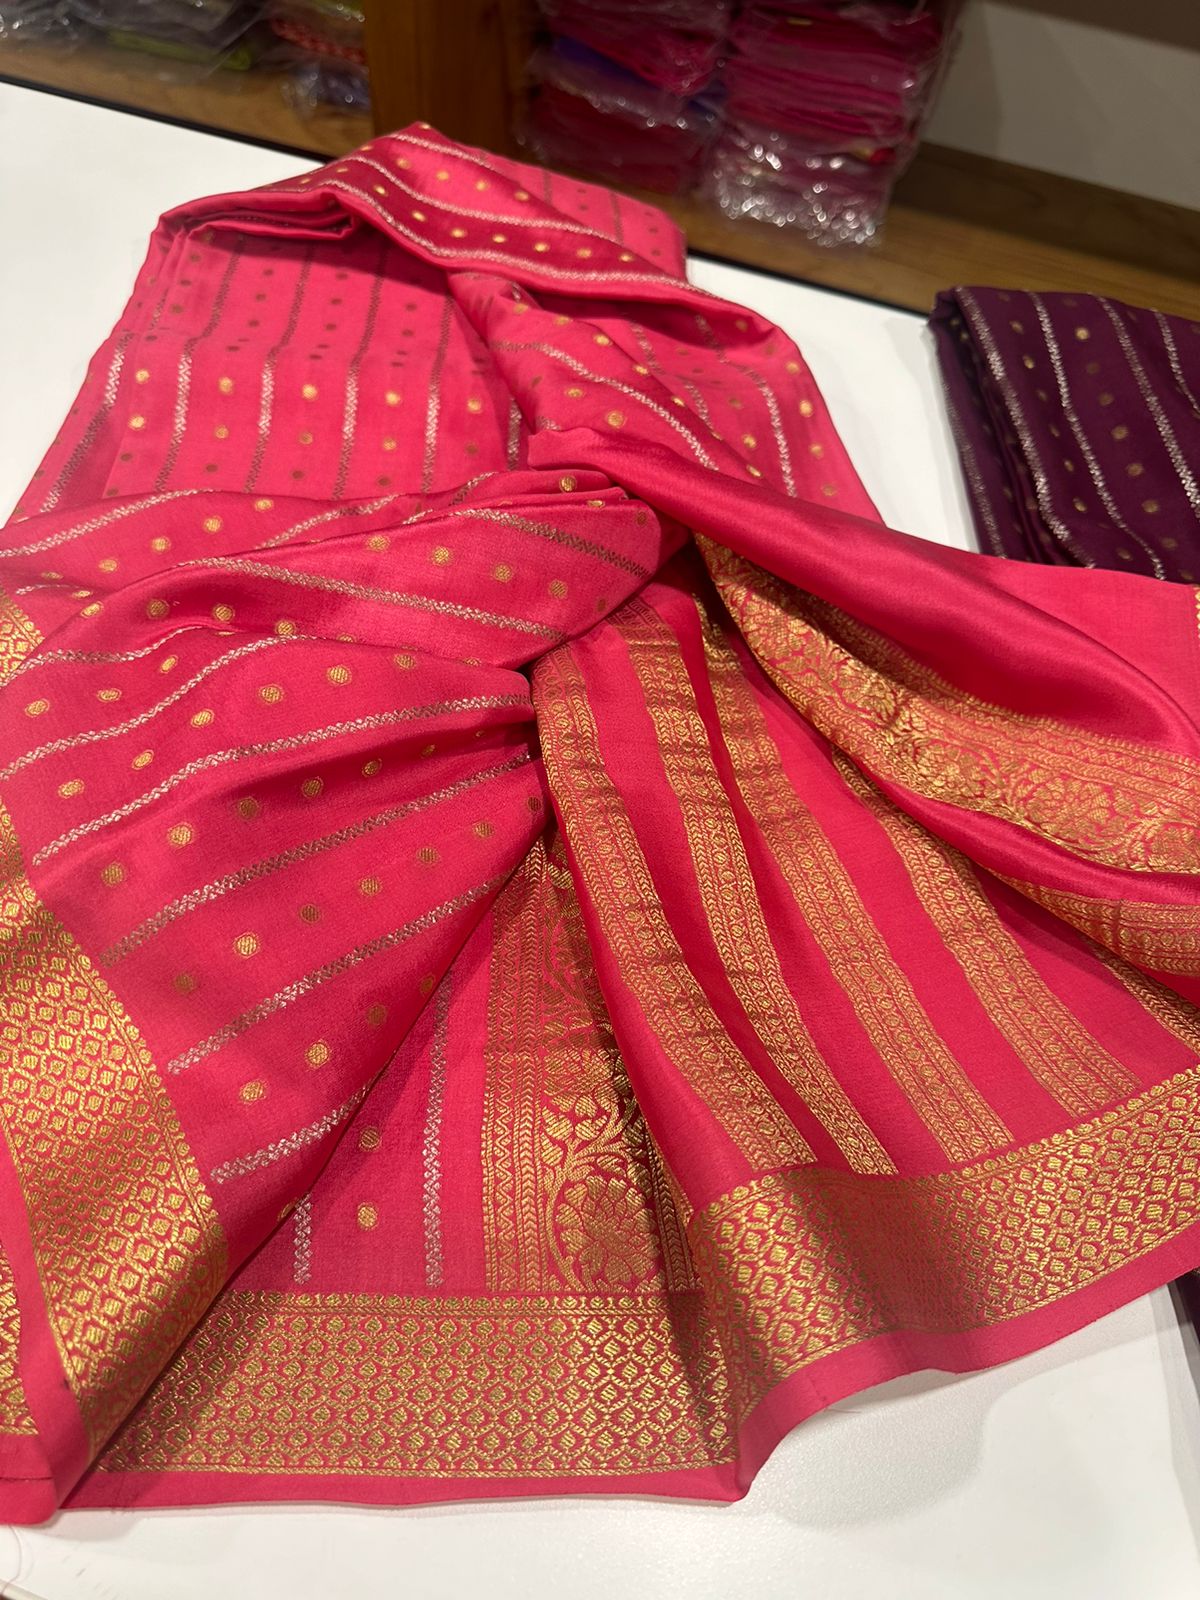 Pure Mysore silk sarees with 120 grm thickness and heavy borders with traditional motif design pattern with beautiful color combination with rich Pallu